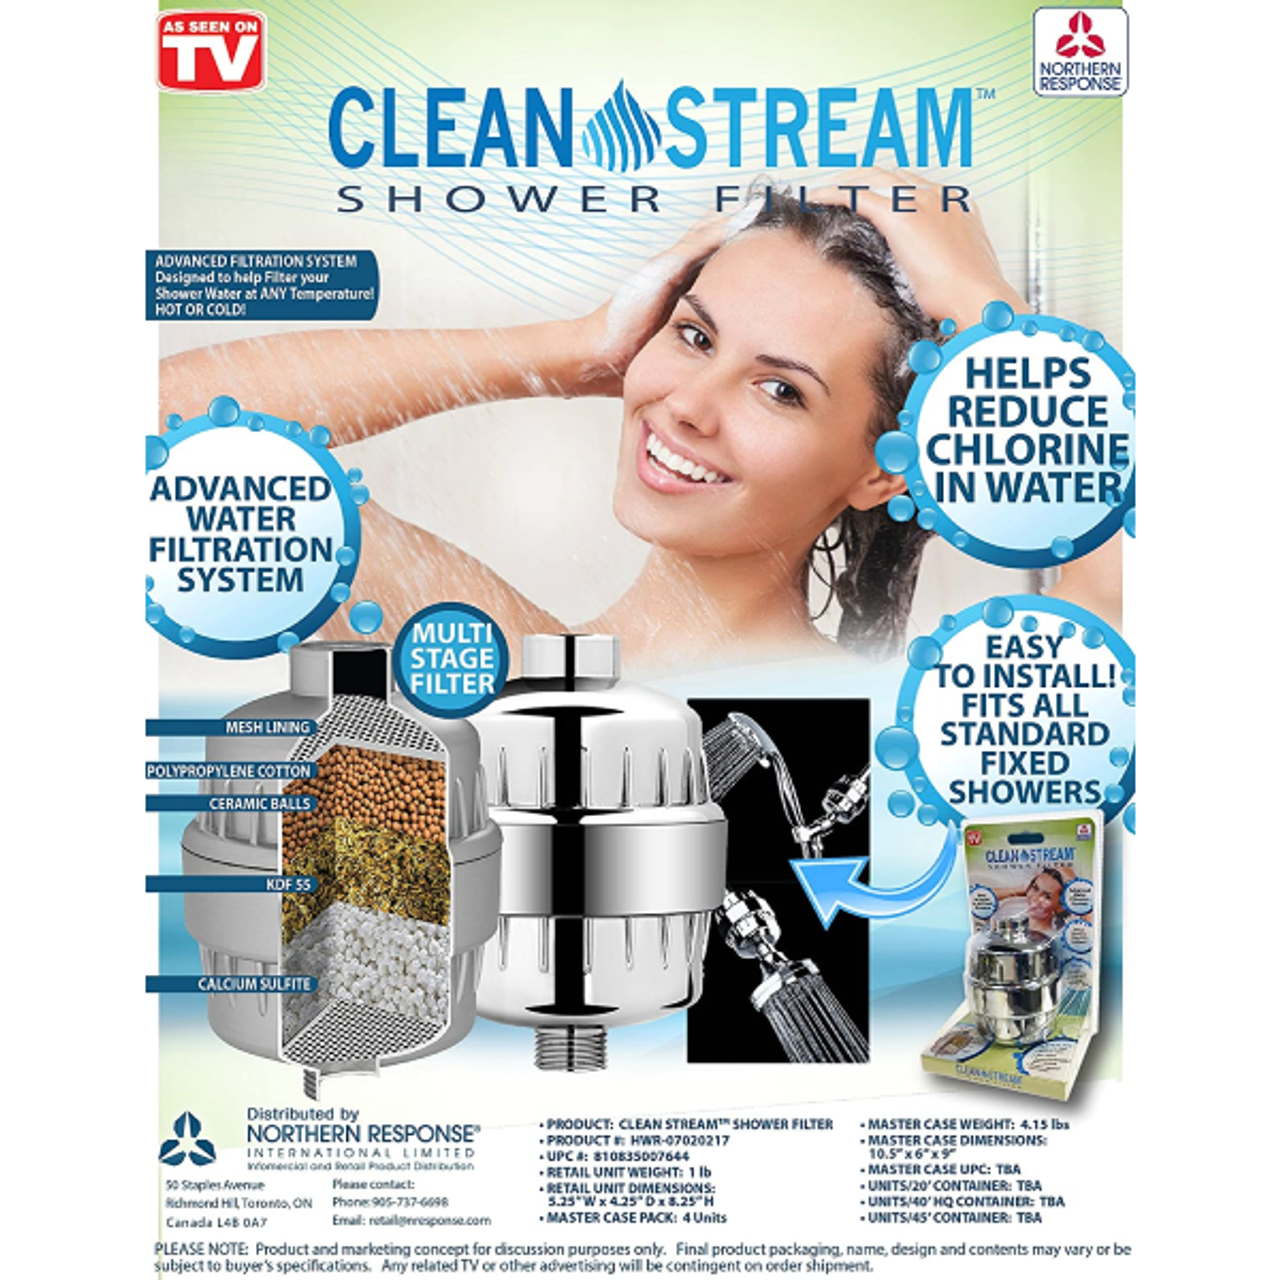 Clean Stream Shower Filter product image